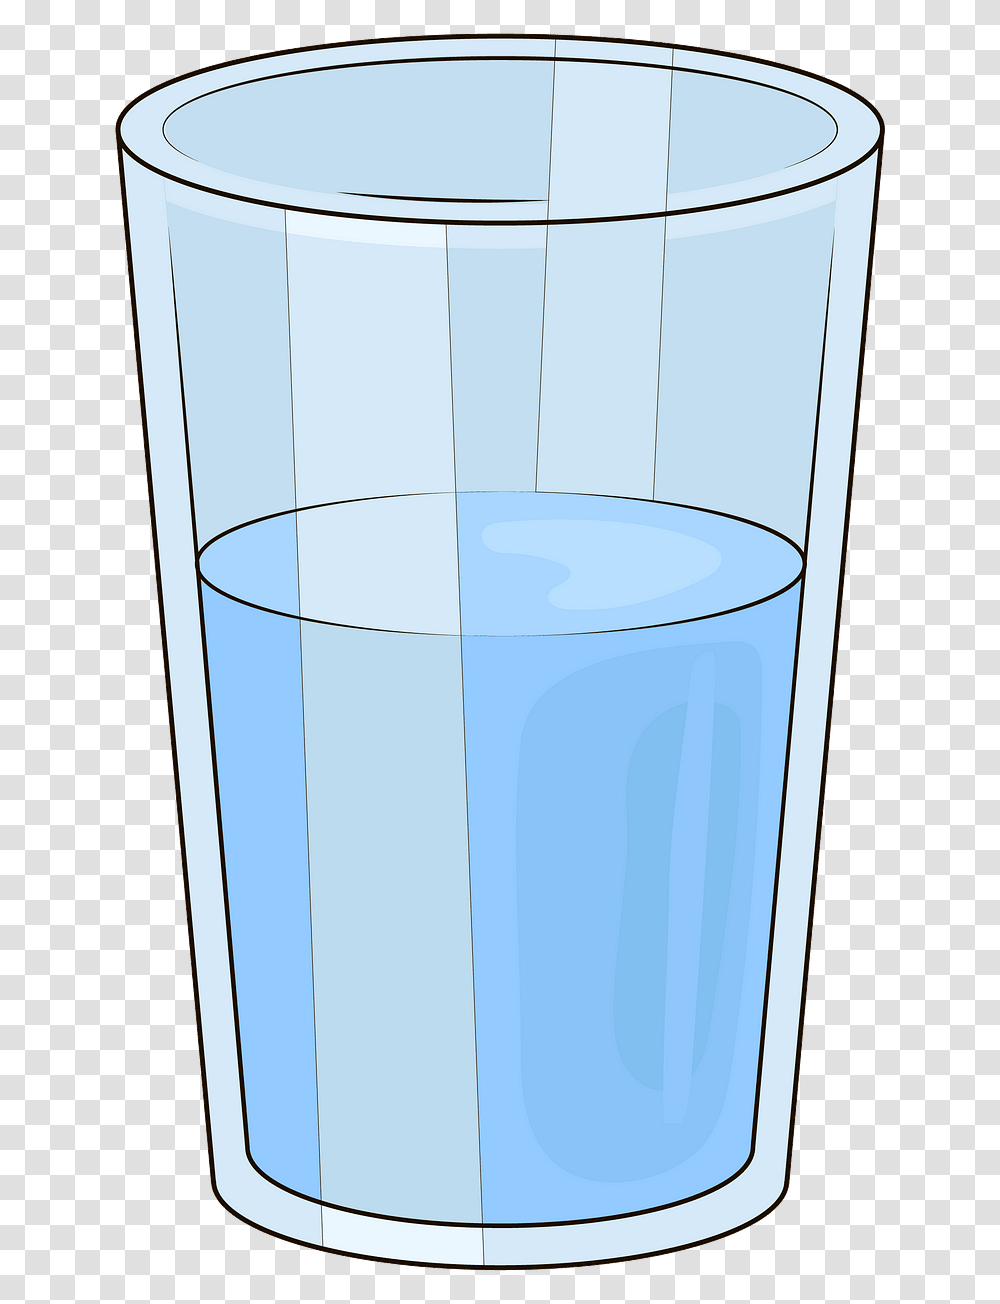 Glass Of Water Clipart Tumbler Pint Glass, Cup, Cylinder, Beverage, Drink Transparent Png